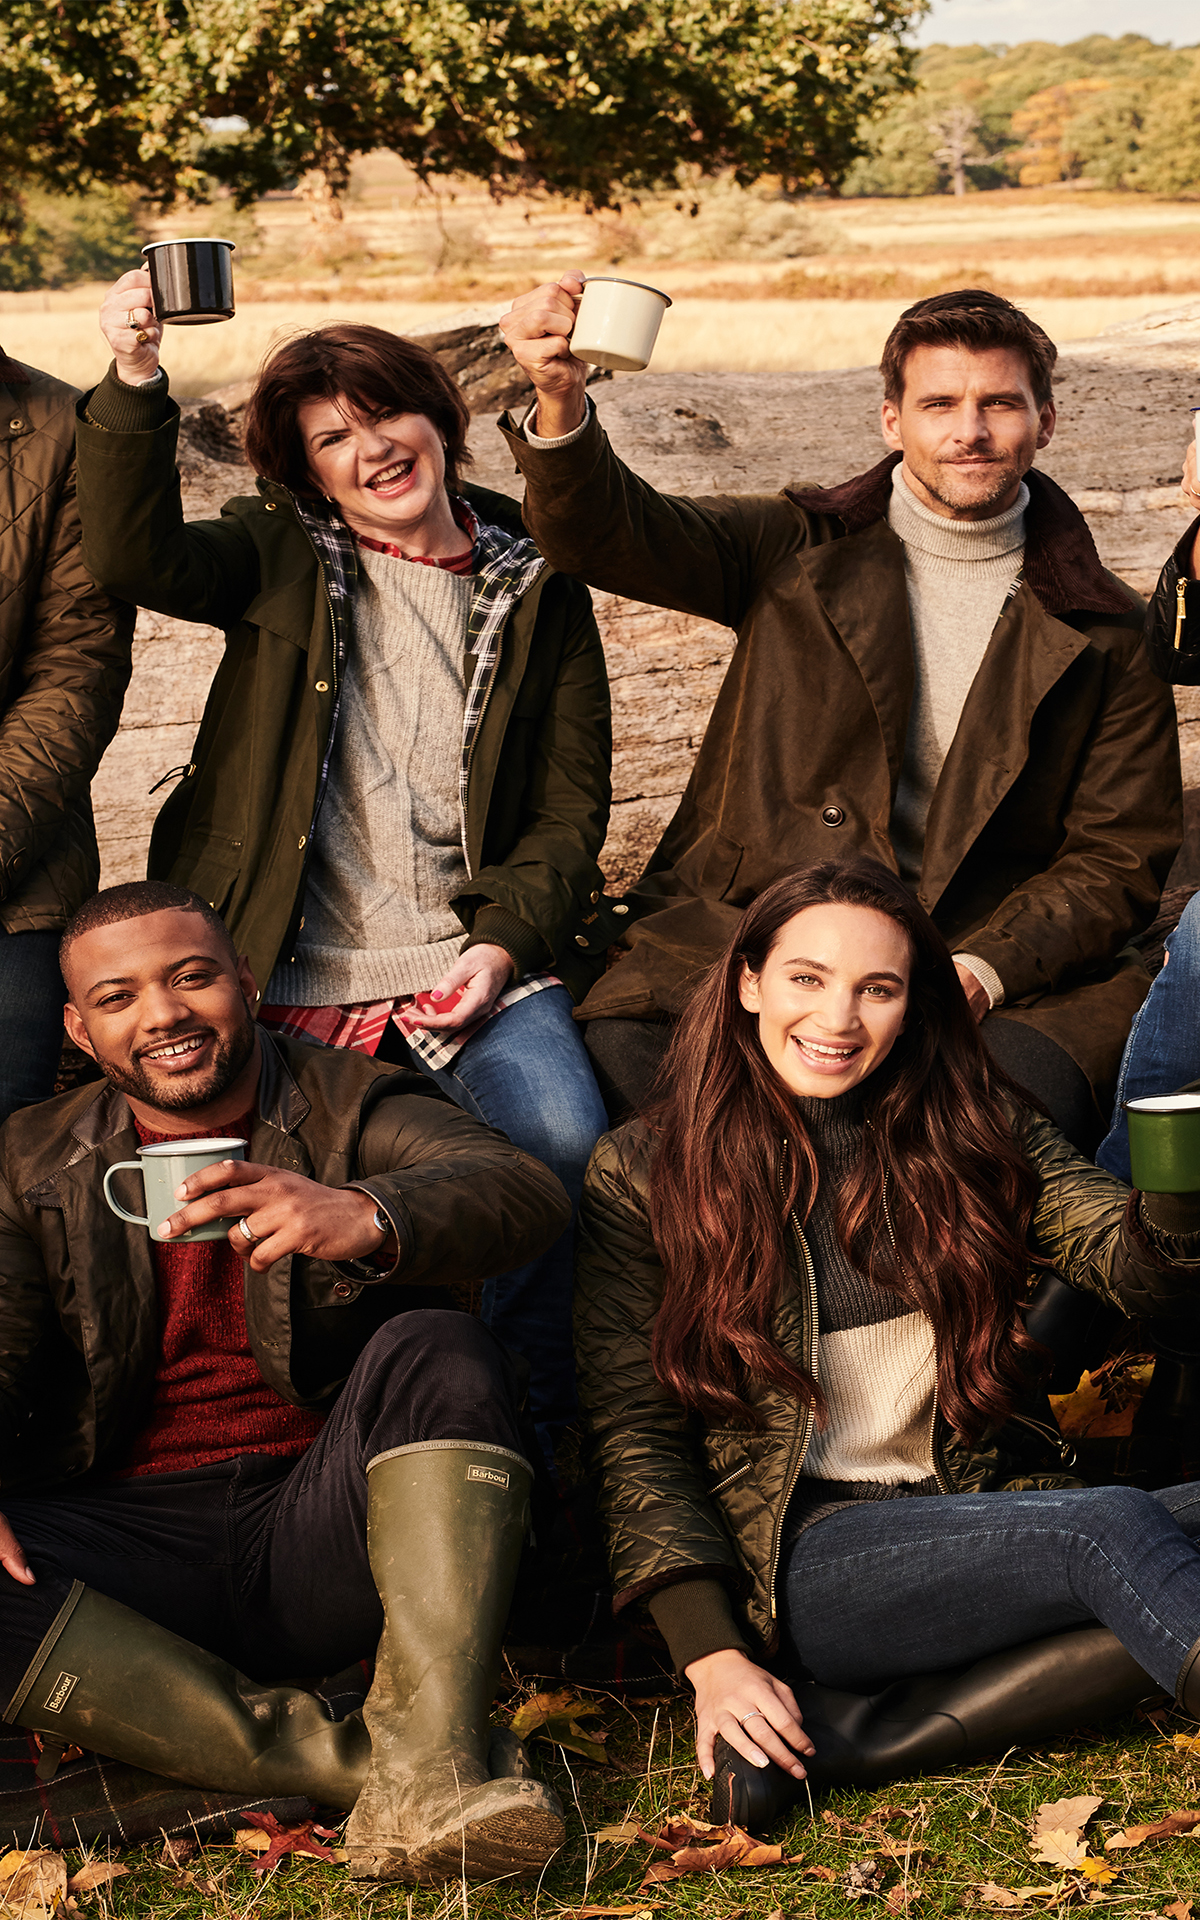 barbour jackets outlet